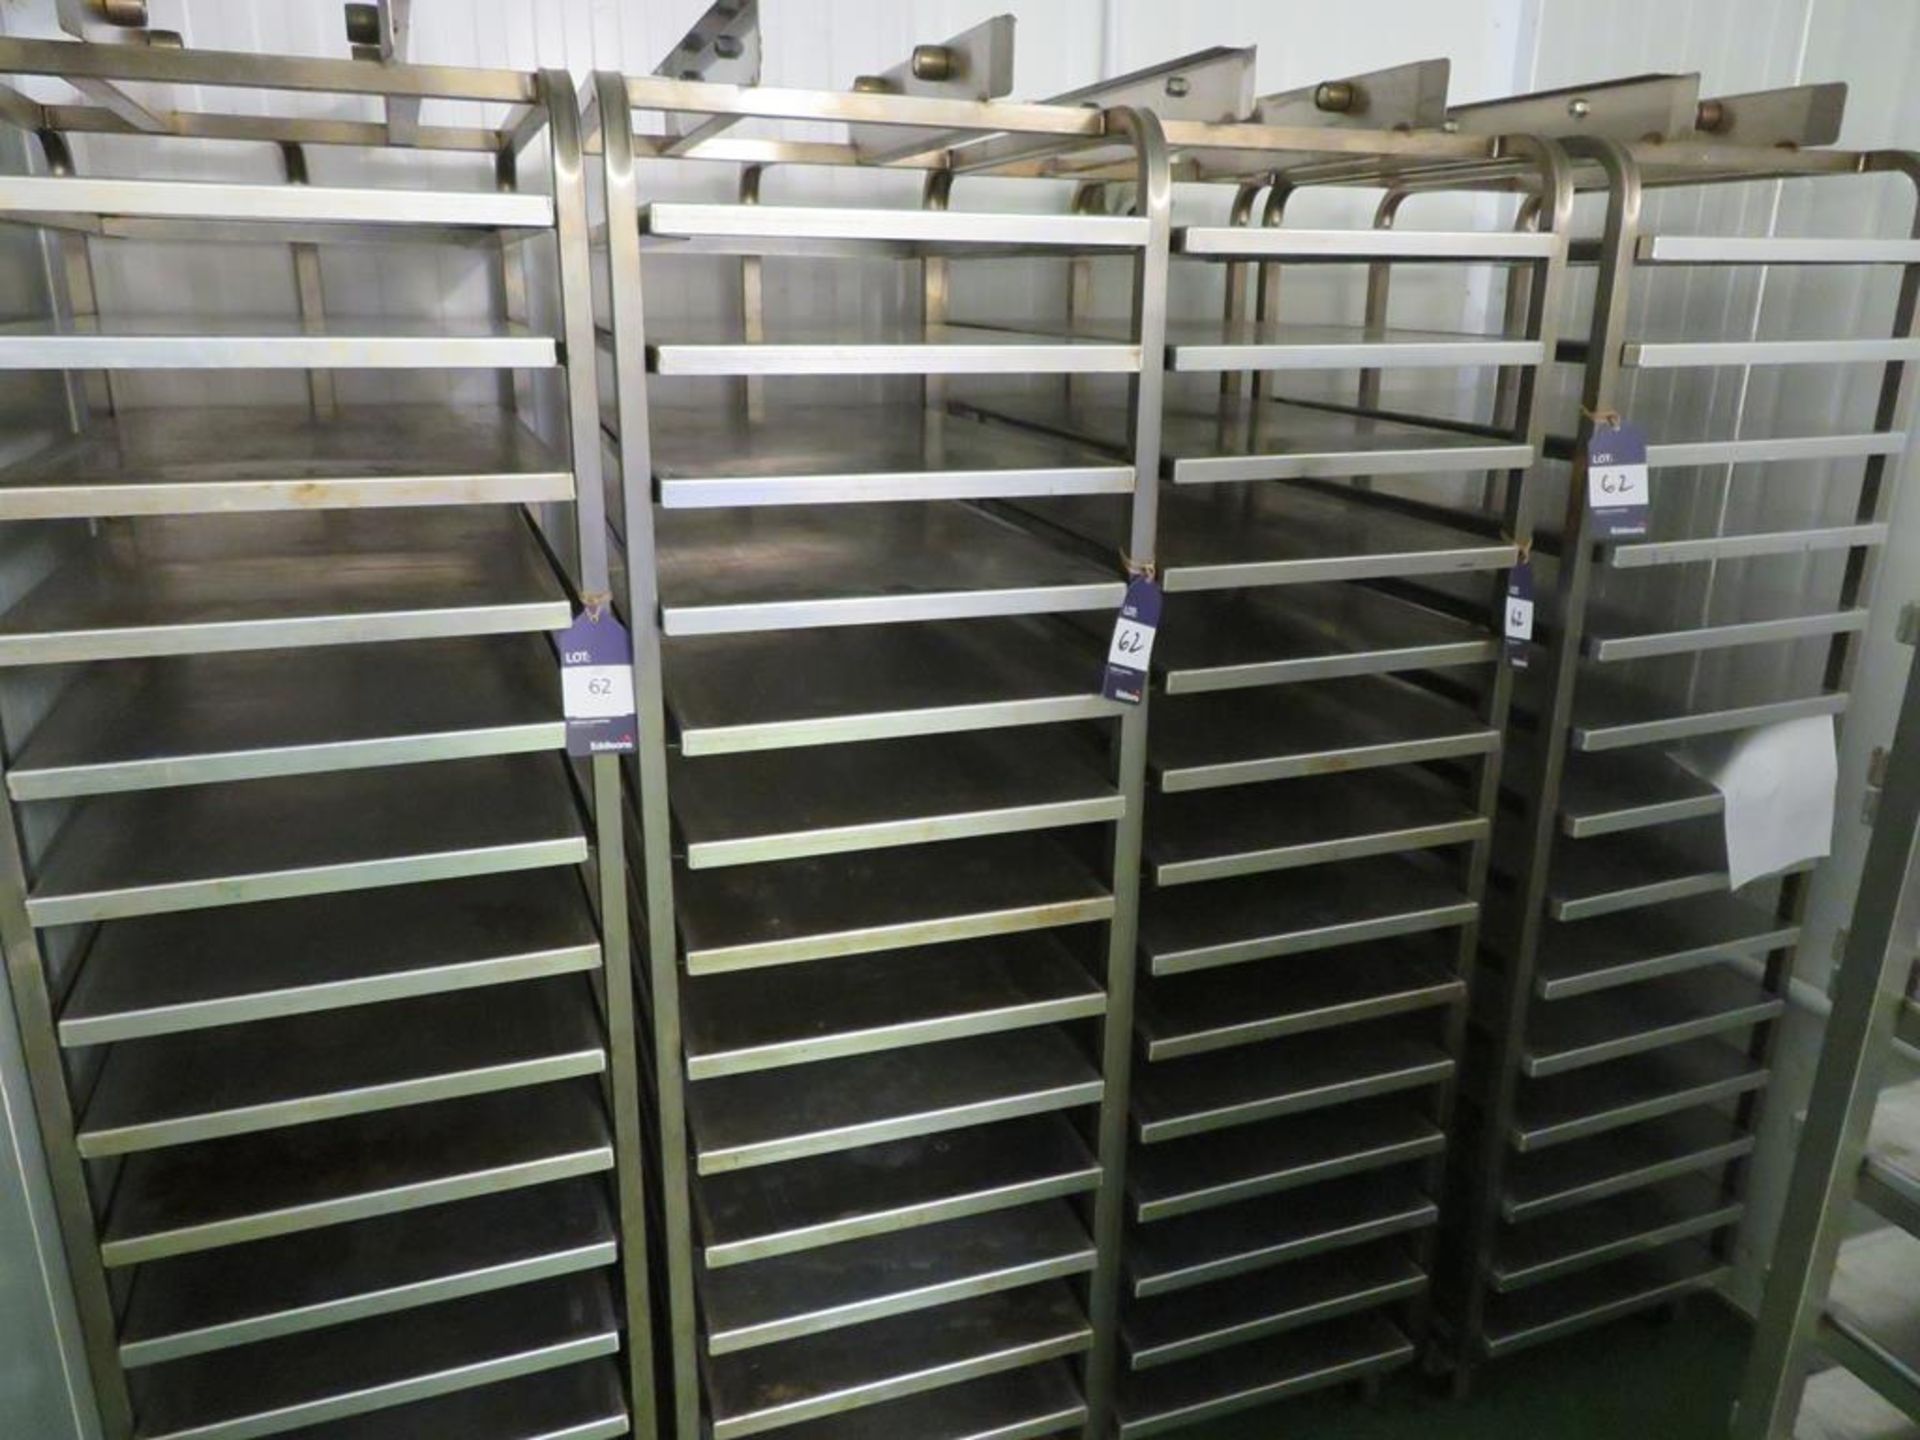 4 x MX Oven 14 Tray Oven Racks & a Qty of Trays